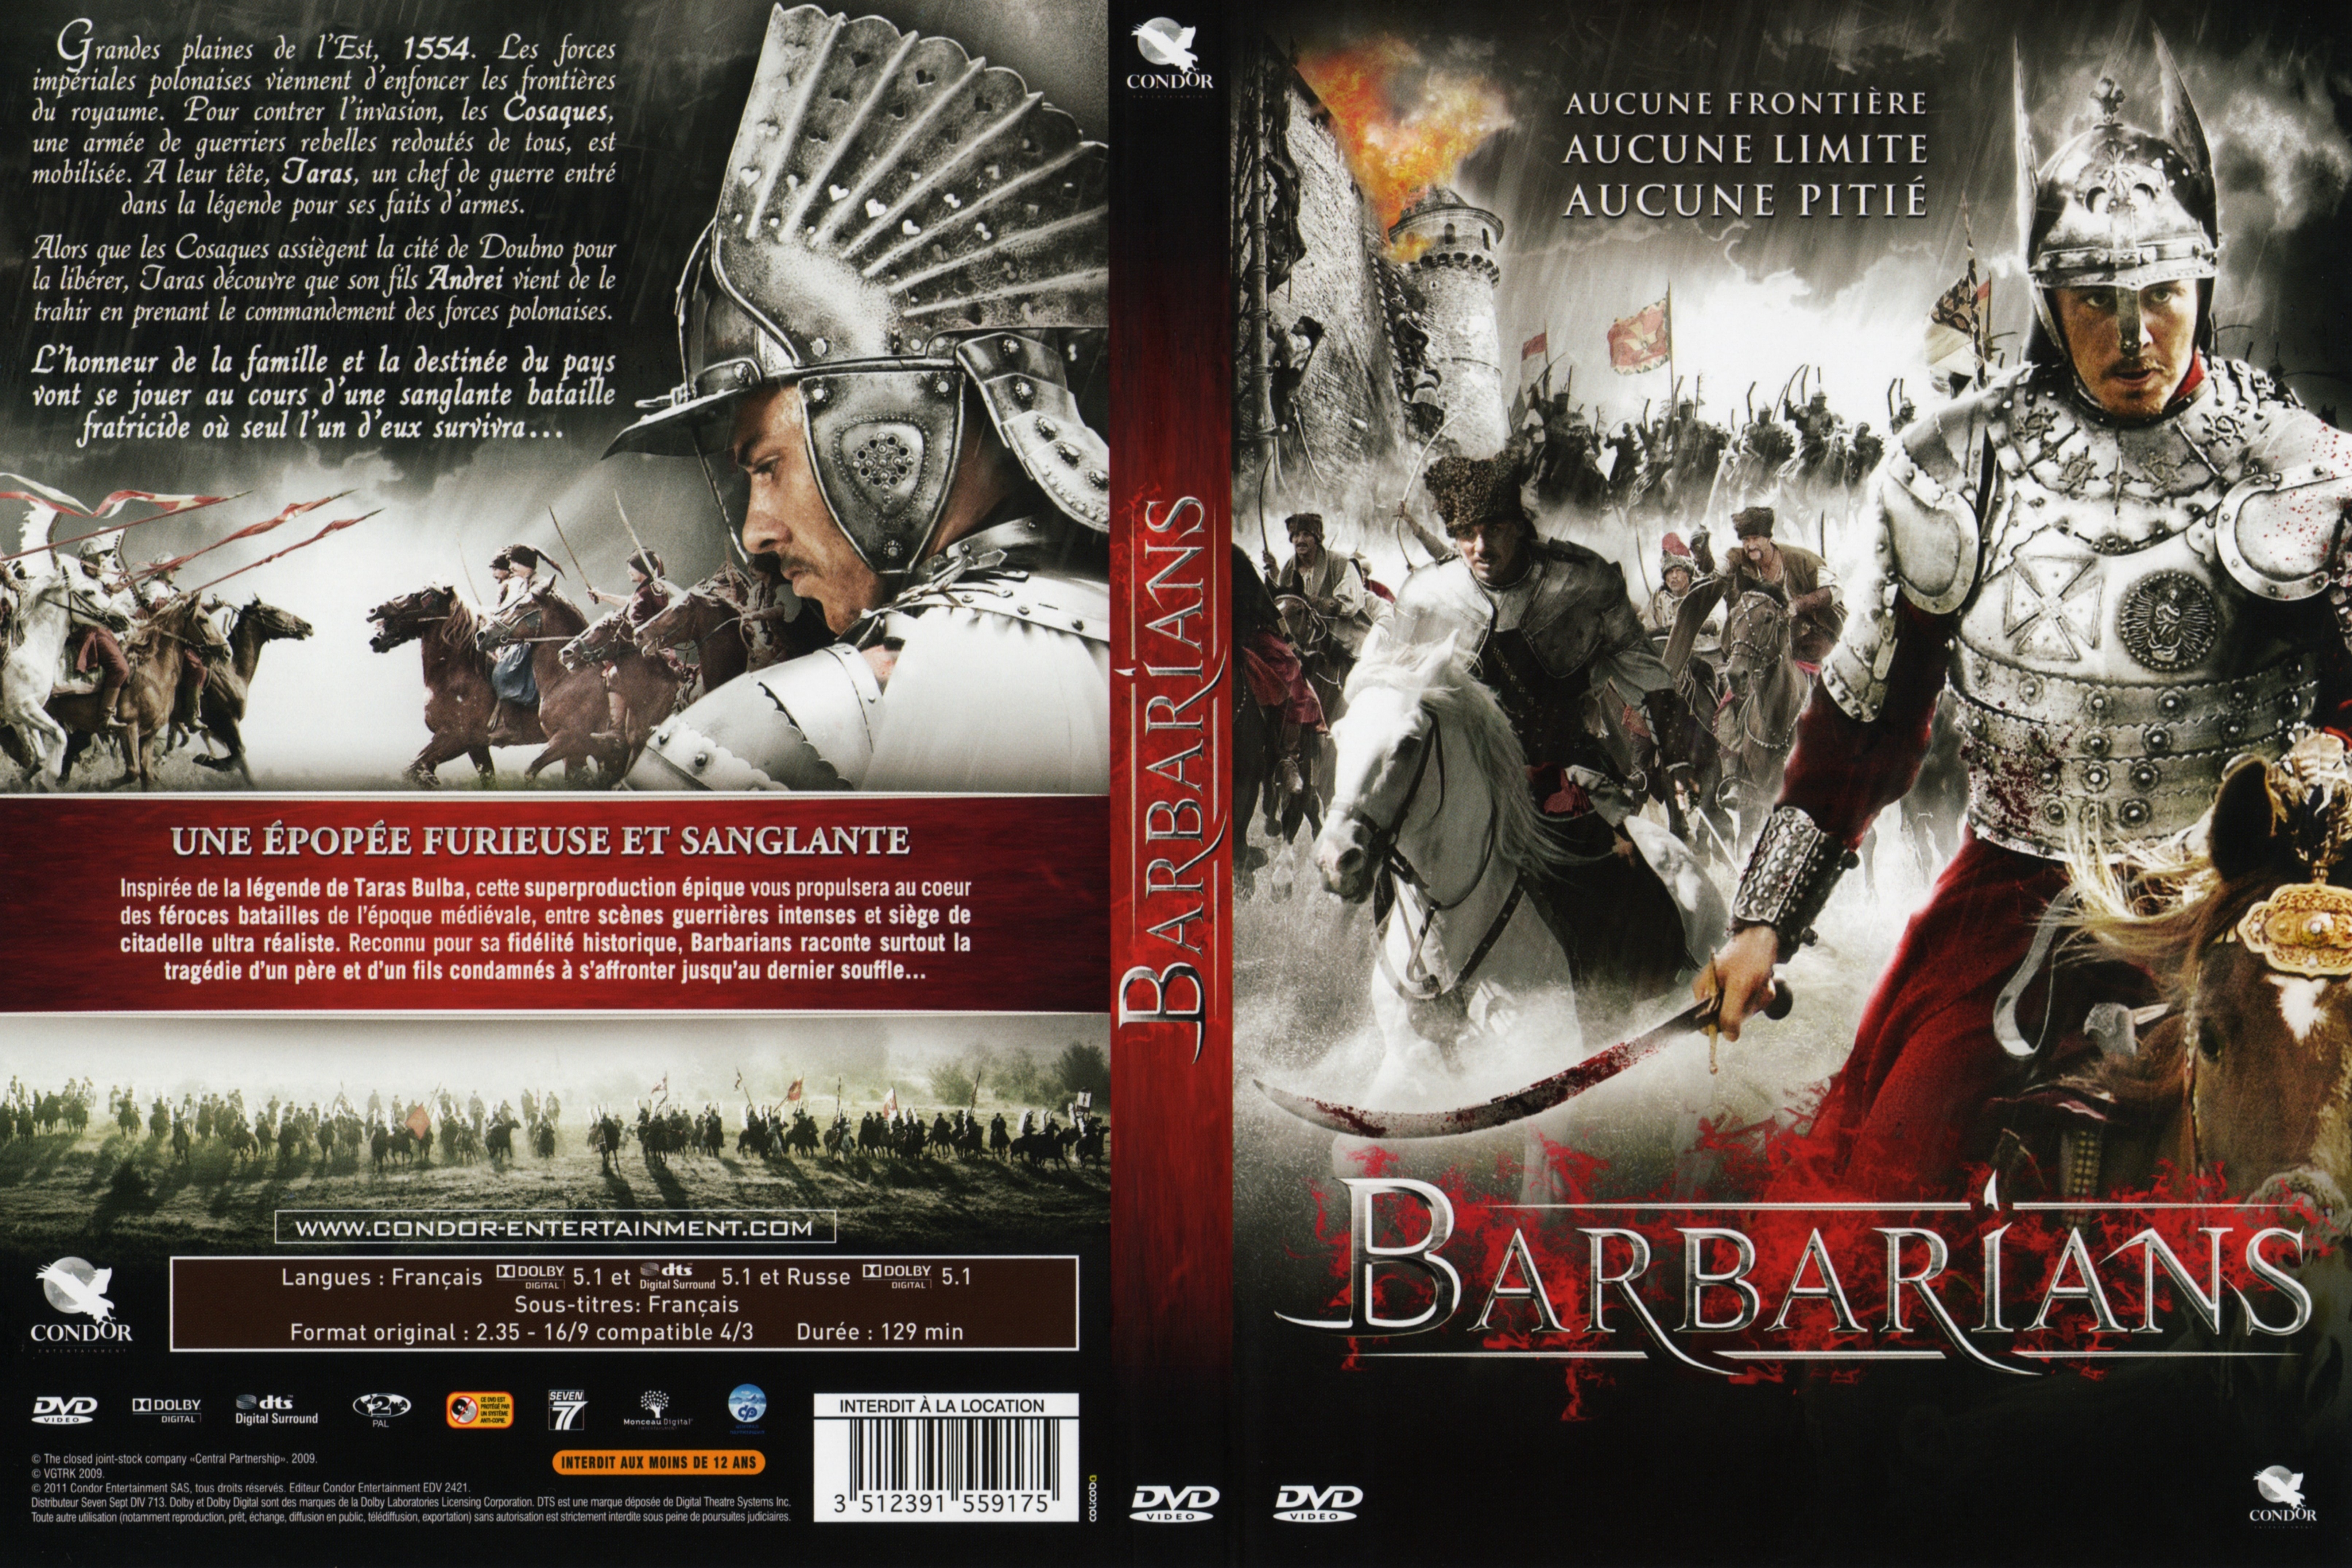 Jaquette DVD Barbarians (2010)